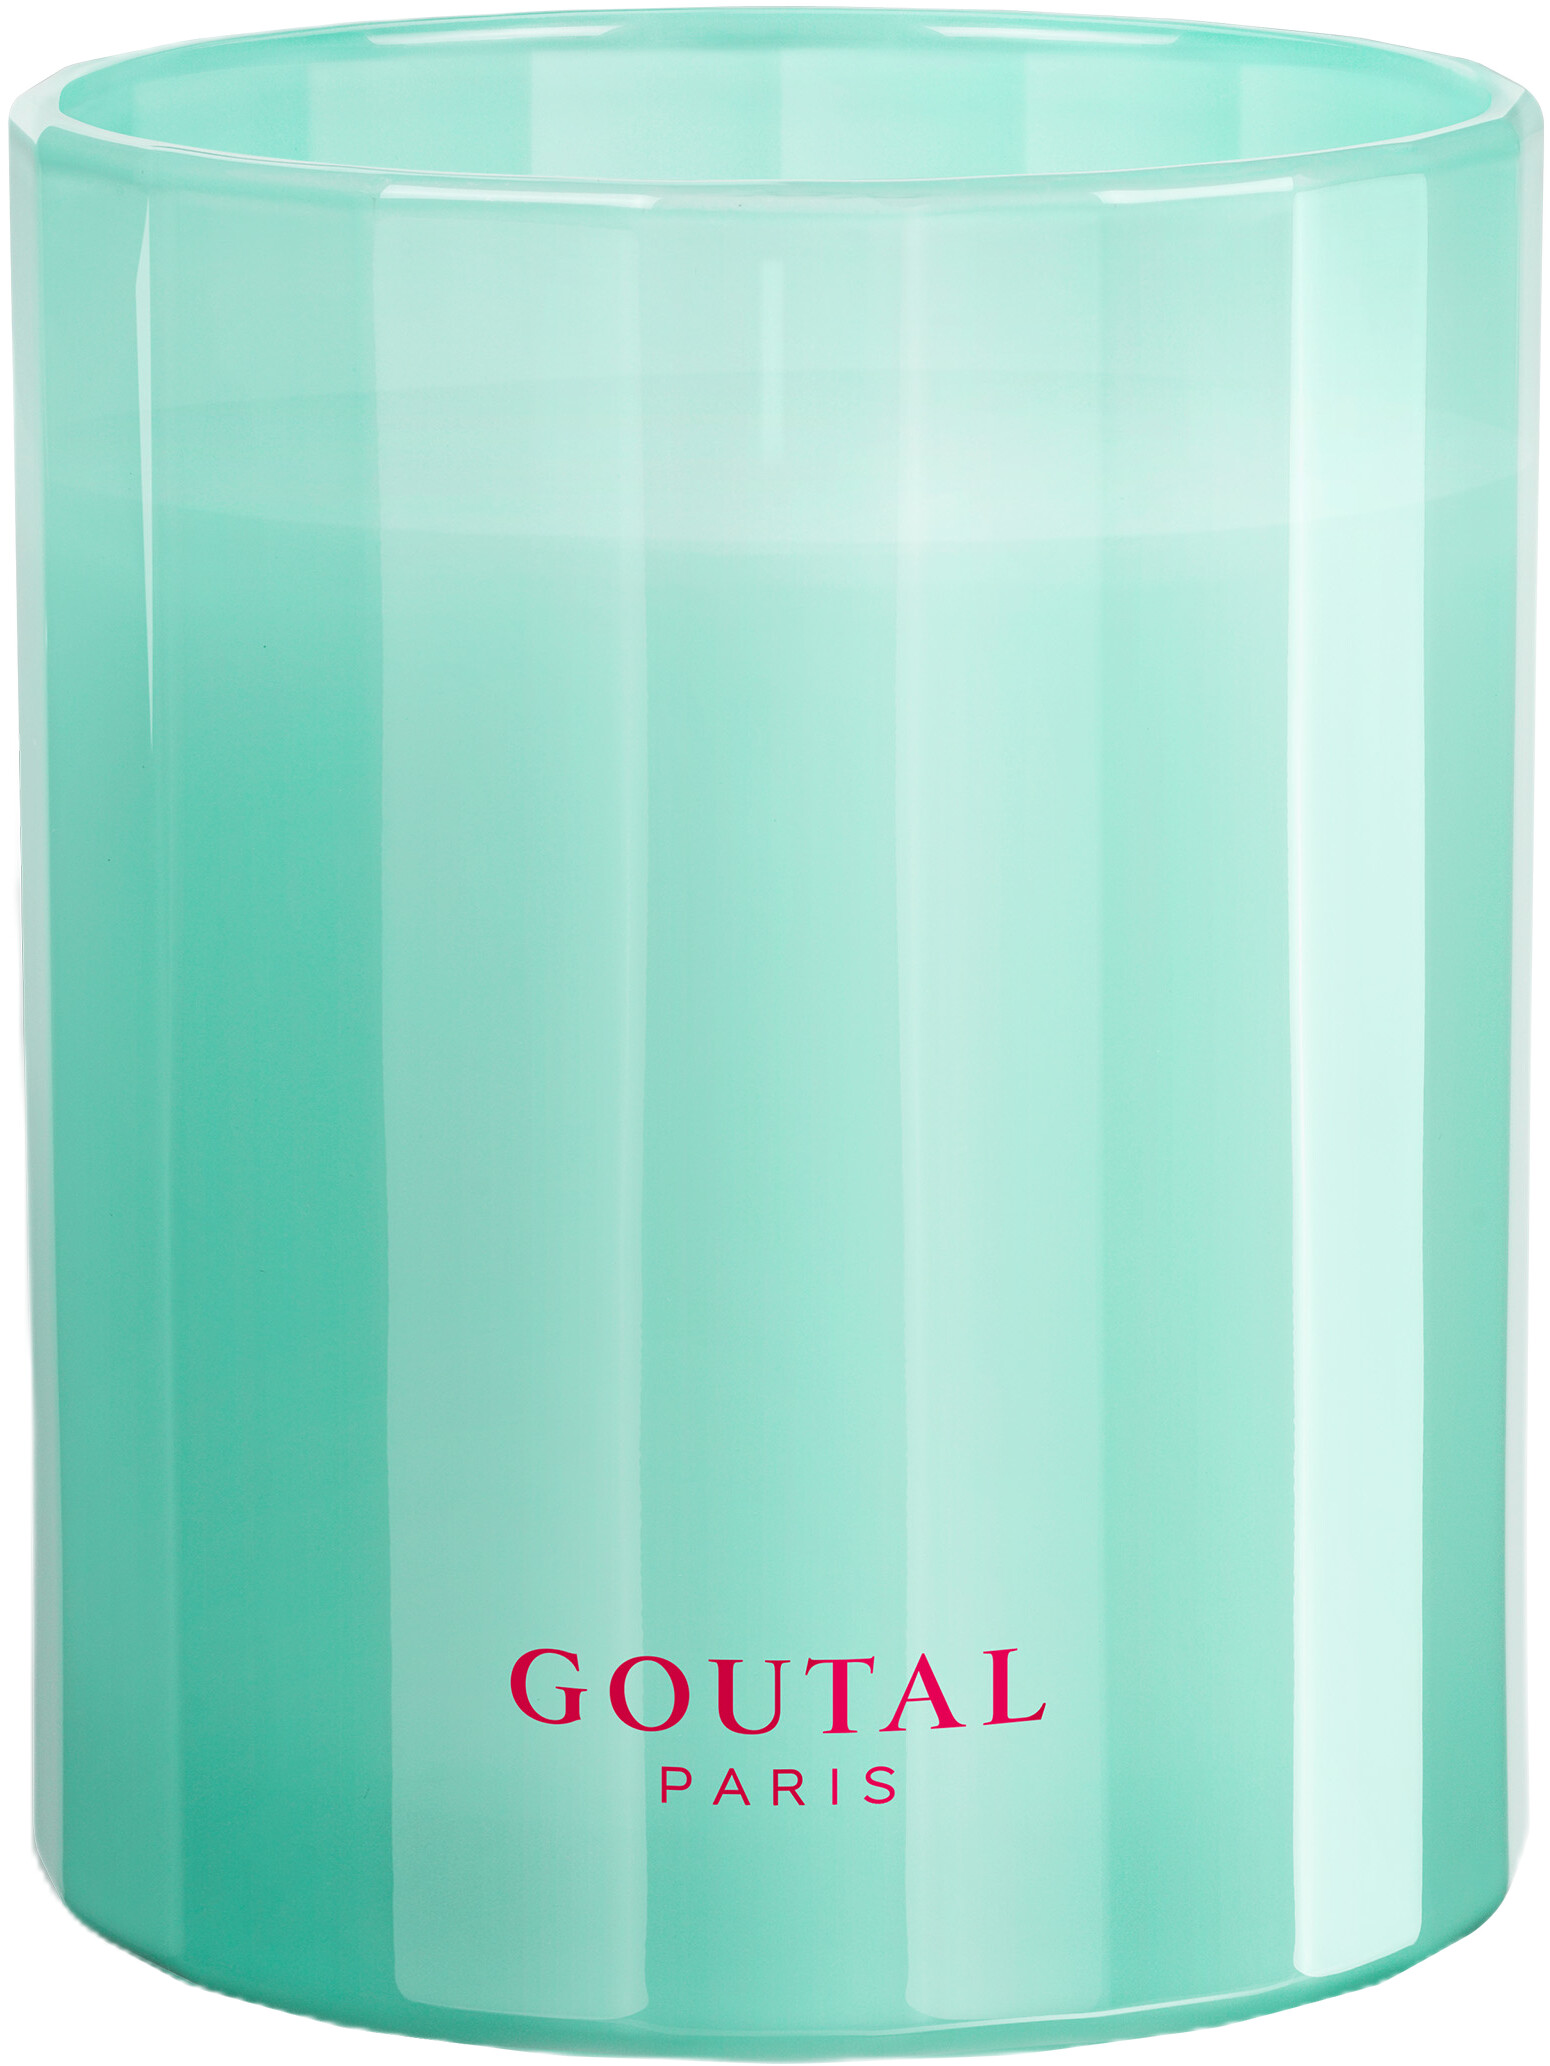 Goutal Petite Cherie Candle Limited Edition 185g